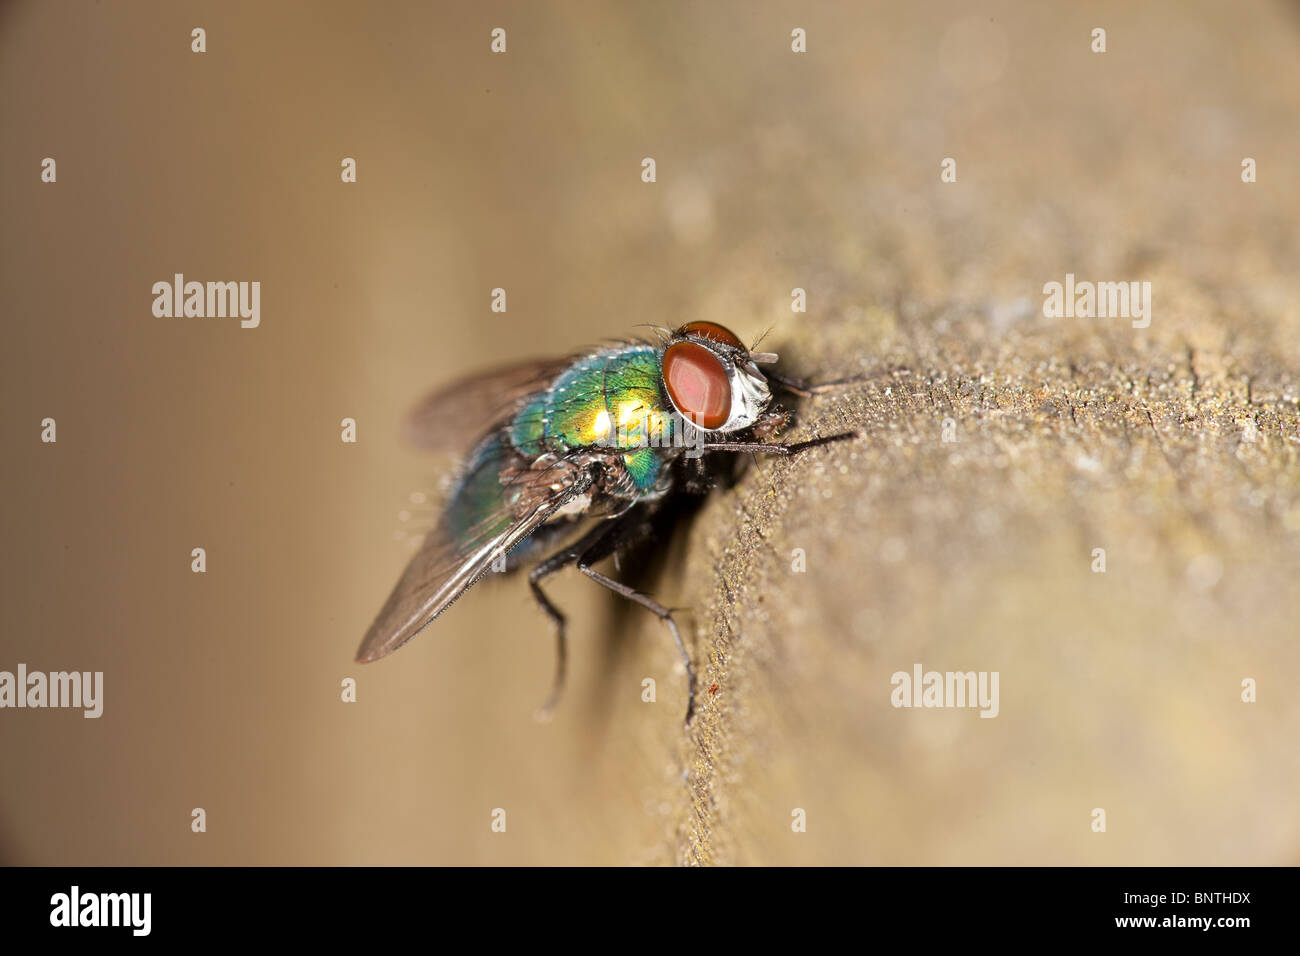 Cloce up of a blowfly Stock Photo